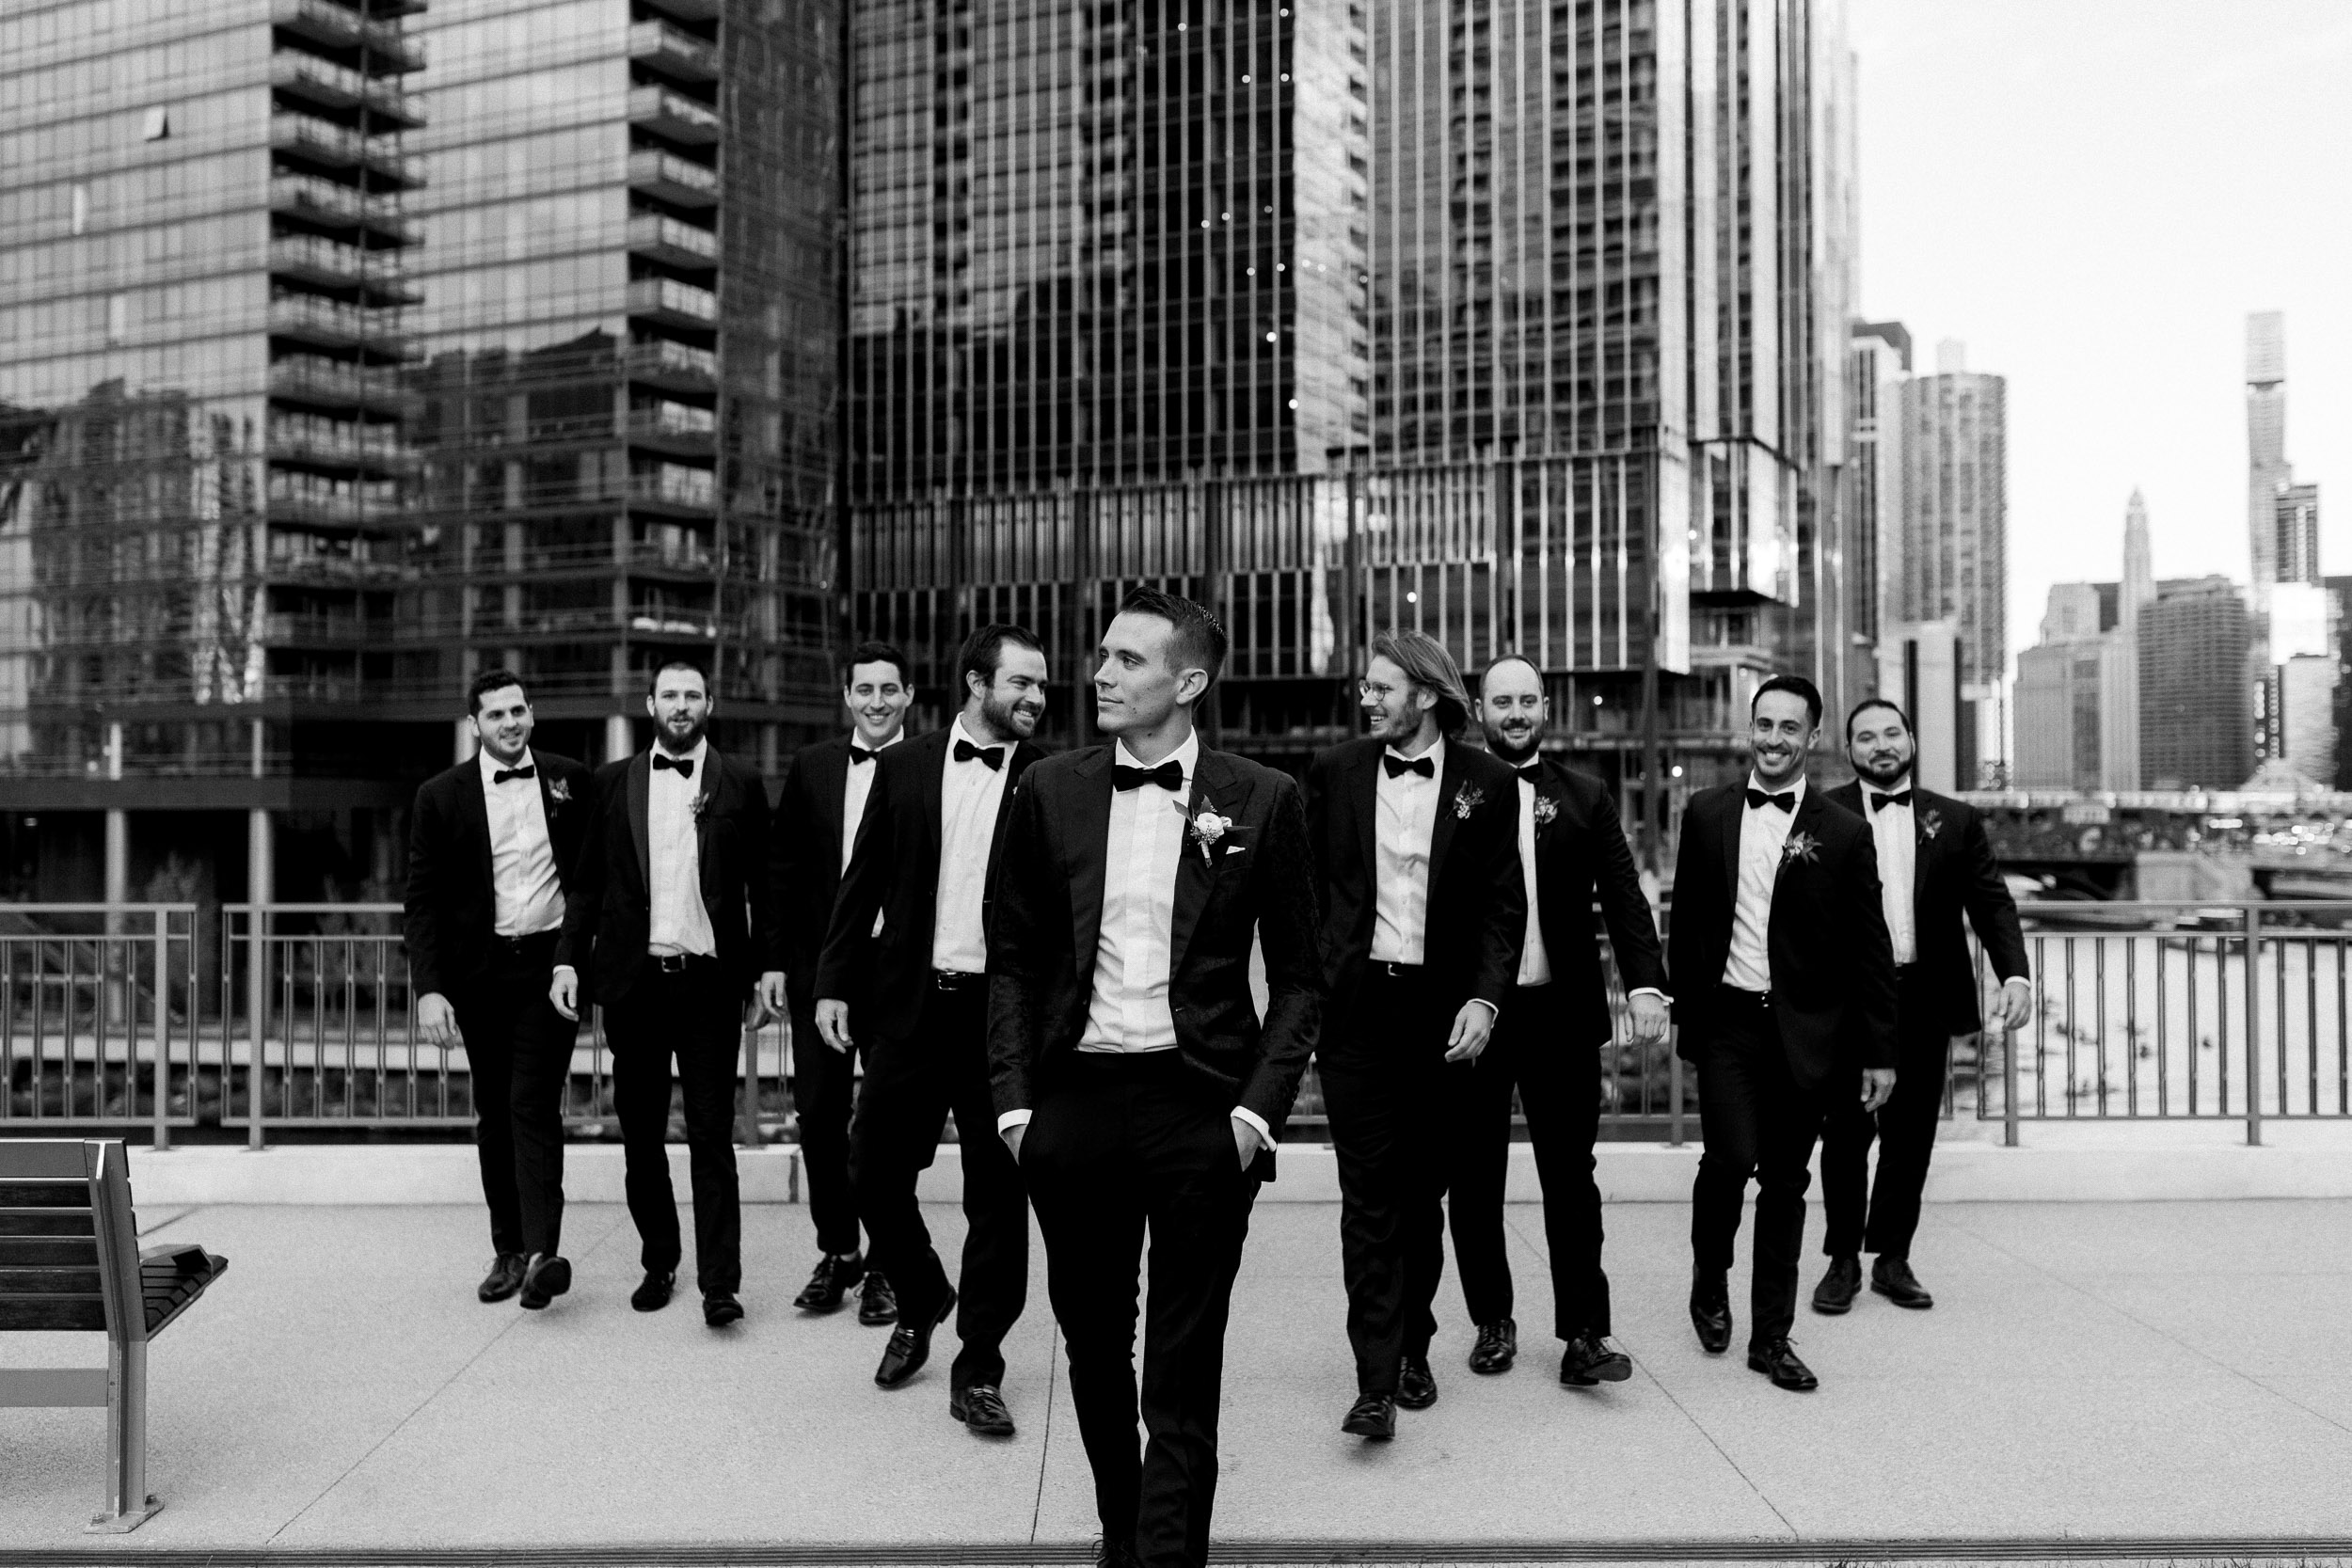 Bridal party for downtown Chicago wedding on the river with skyline | groomsmen photos in black and white